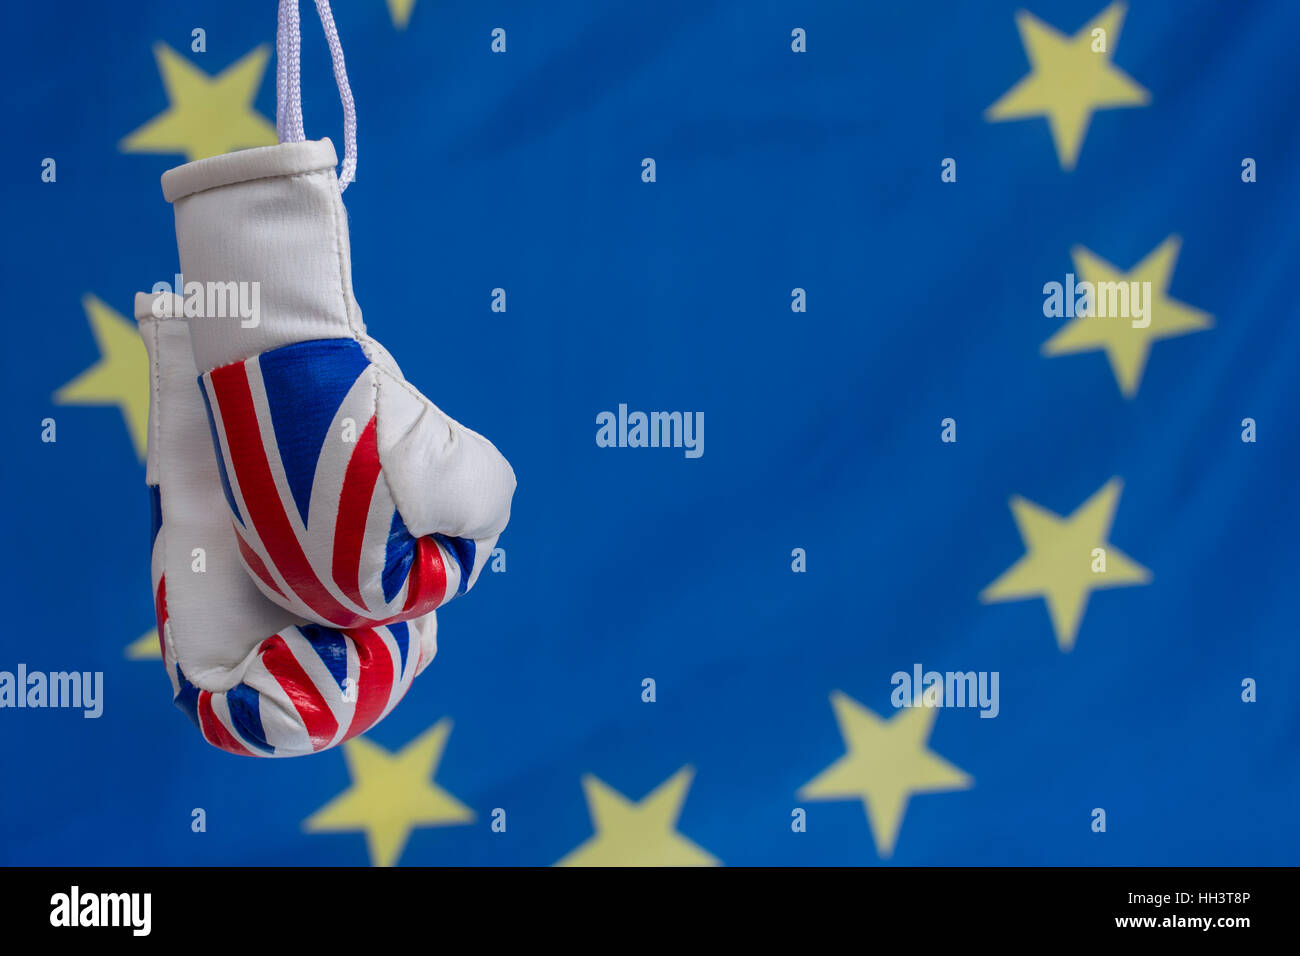 Union Jack boxing gloves blue background & yellow stars (like EU flag). Concept UK trade / Brexit negotiations,  EU UK relationship, gloves are off Stock Photo